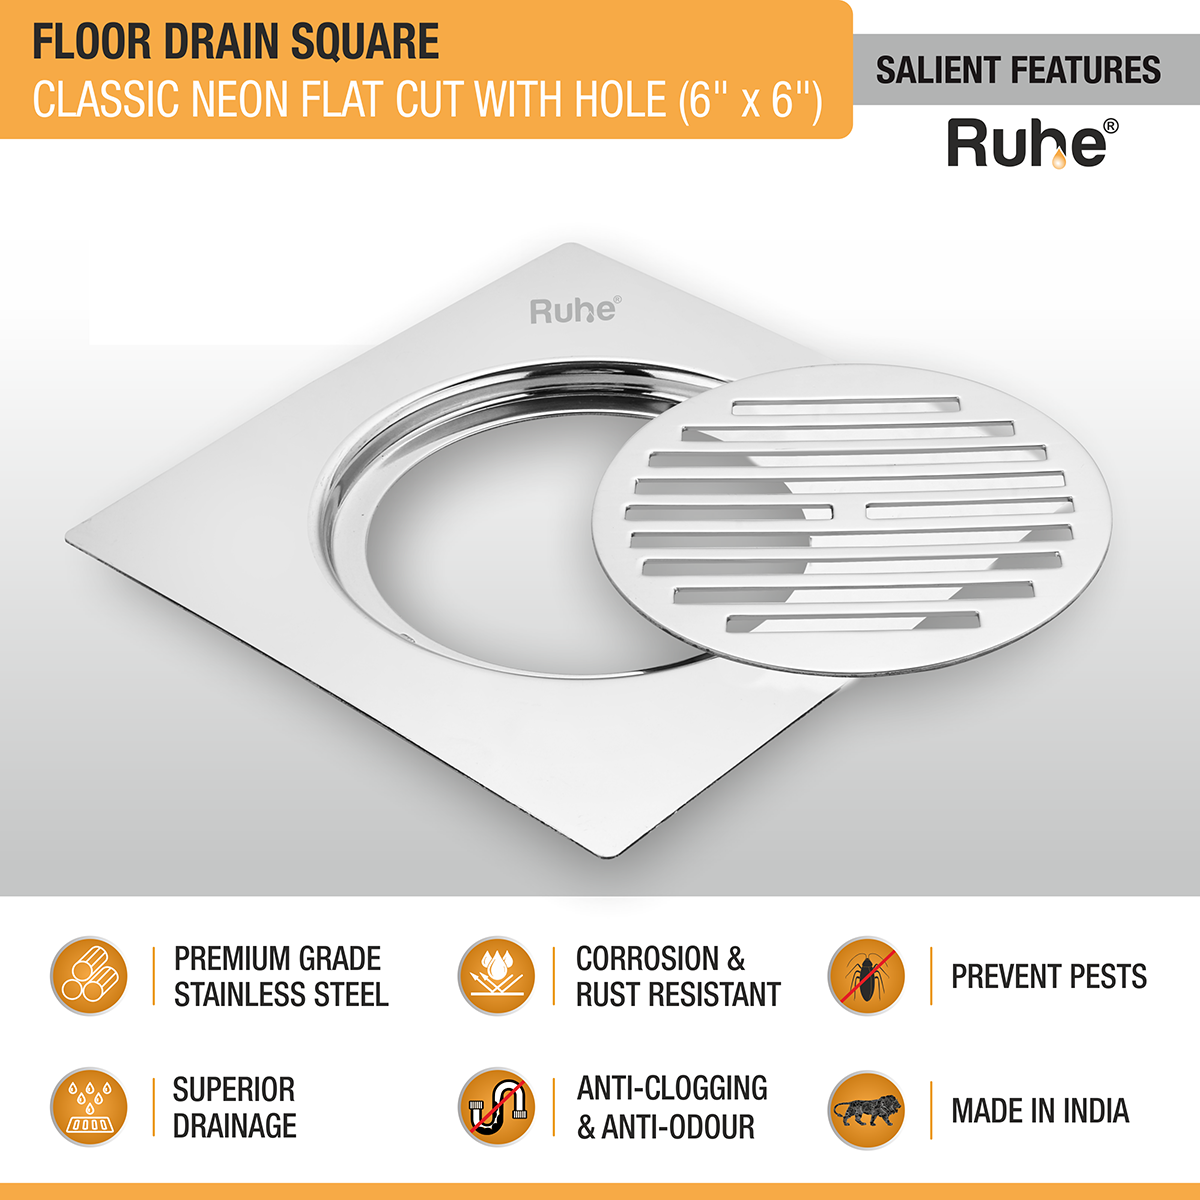 Classic Neon Square Flat Cut Floor Drain (6 x 6 inches) with Hole features